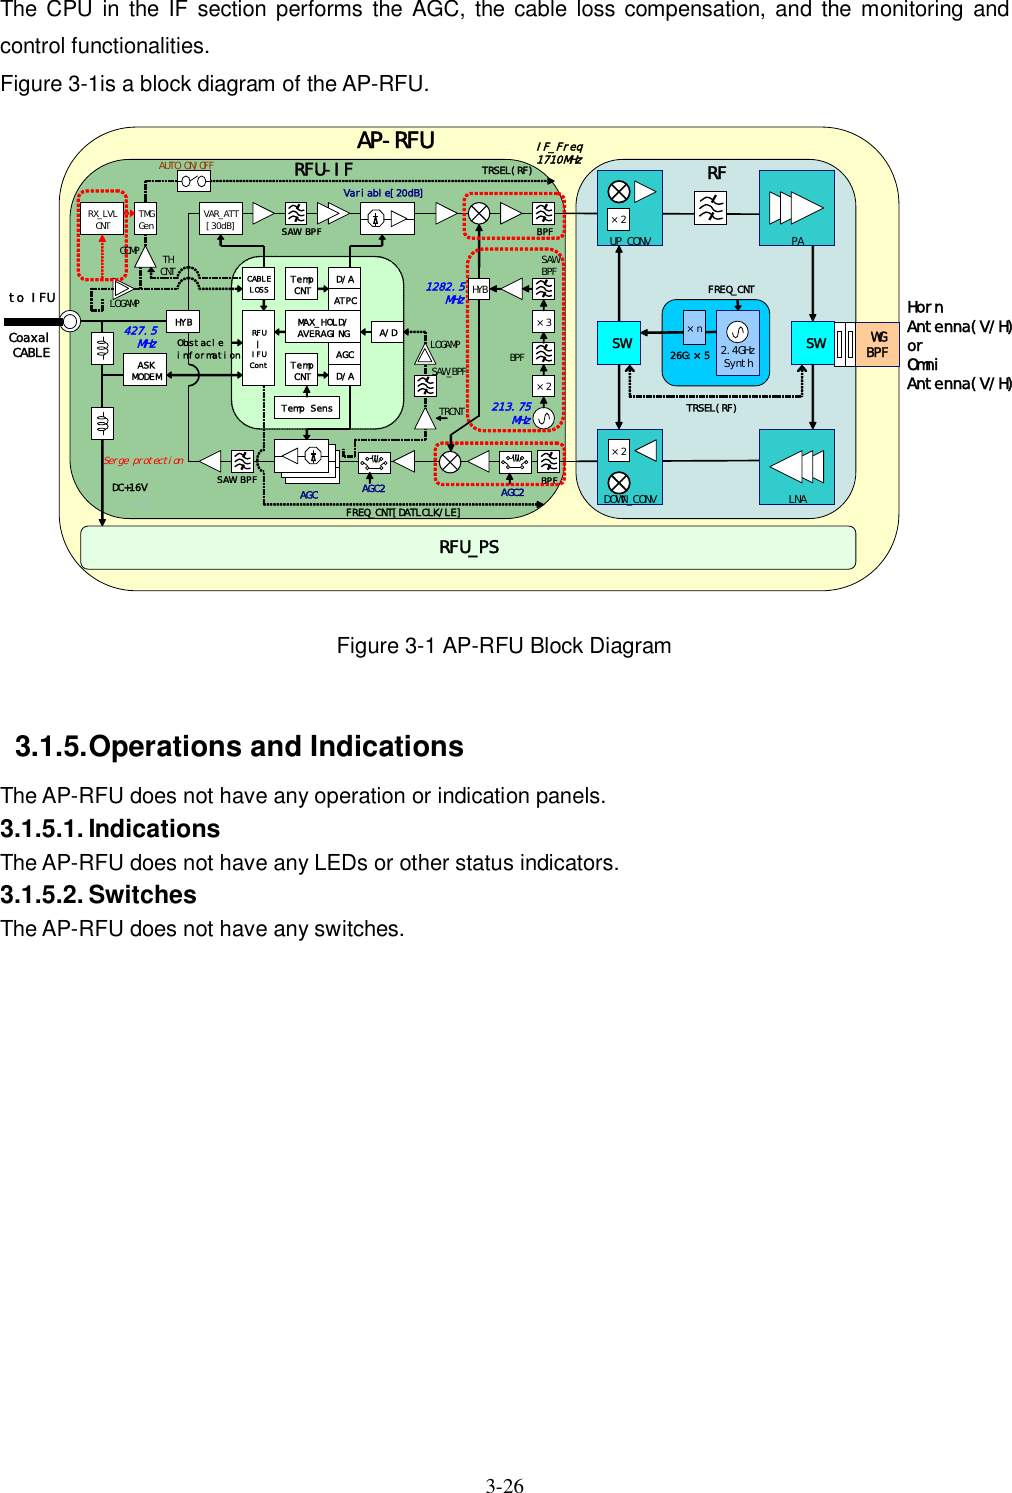  3-26   The  CPU  in the  IF  section  performs the AGC, the  cable loss compensation,  and  the monitoring  and control functionalities. Figure 3-1is a block diagram of the AP-RFU. to IFUAP-RFUWGBPFRFSWLNASW2.4GHzSynth26G:×5×n×2DOWN_CONVTRSEL(RF)PA×2UP_CONVFREQ_CNTIF部HYBASKMODEMTempCNT D/AD/AAGC×21282.5MHzATPCAGC213.75MHzMAX_HOLD/AVERAGING A/DTRCNTVariable[20dB]TempCNTRFU¦IFUCon tTemp SensVAR_ATT[30dB]CAB L ELOS SDC+16VLOGAMPTMGGenTHCNTObstacleinformationTRSEL(RF)FREQ_CNT[DATLCLK/LE]427.5MHzSAW_BPFIF_Freq1710MHzSAW_BPFHornAntenna(V/H)orOmniAntenna(V/H)×3BPFSAWBPFBPFBPFLOGAMPSAW_BPFAGC2RX_LVLCNTAUTO ON/OFFAGC2RFU-IFRFU_PSSerge protectionCoaxalCABLEHYBCOMP Figure 3-1 AP-RFU Block Diagram    3.1.5. Operations and Indications The AP-RFU does not have any operation or indication panels. 3.1.5.1. Indications The AP-RFU does not have any LEDs or other status indicators. 3.1.5.2. Switches The AP-RFU does not have any switches. 